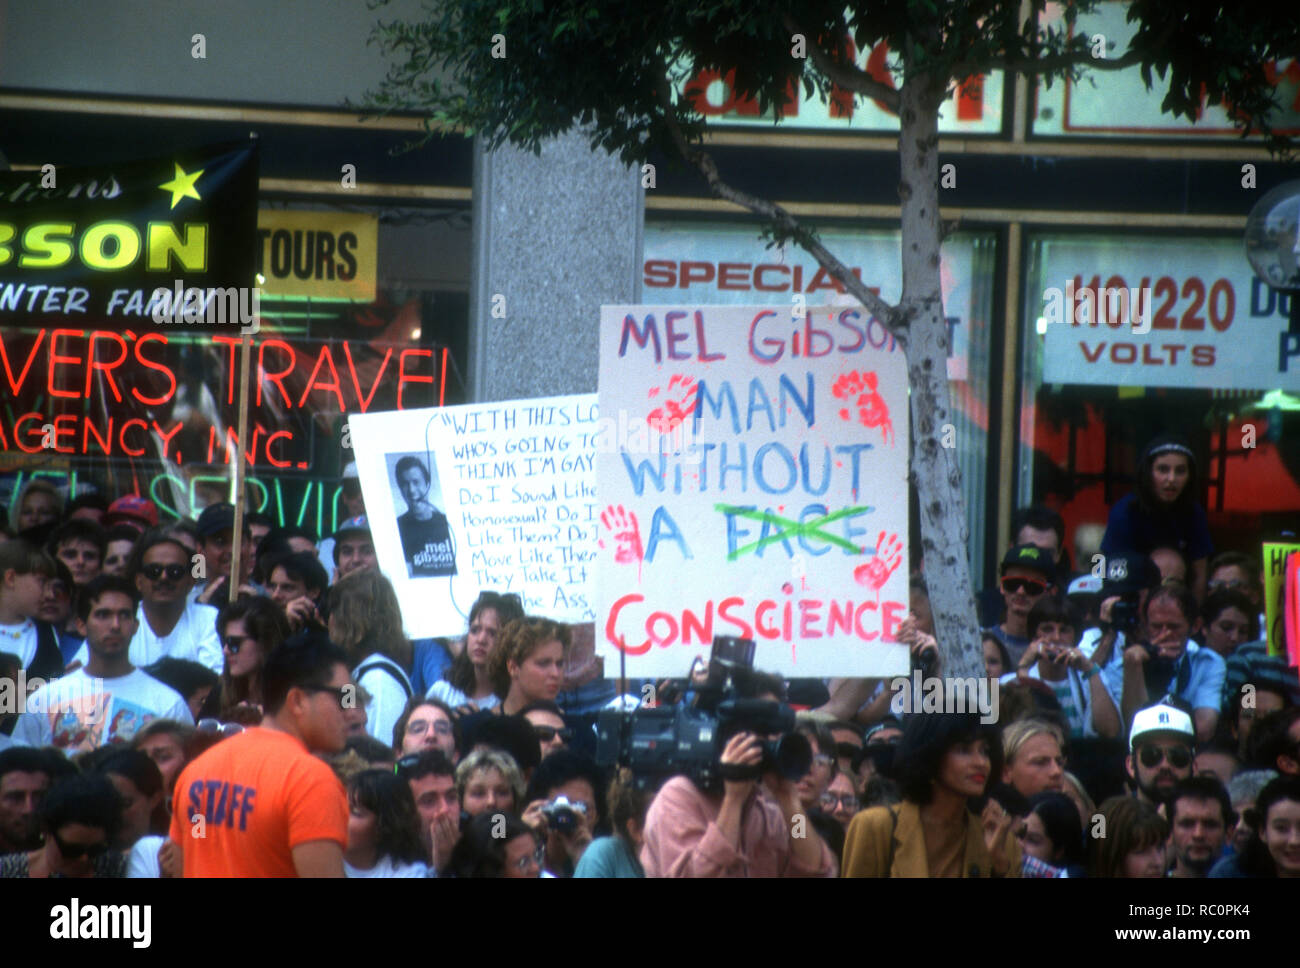 HOLLYWOOD, CA - AUGUST 23: A general view of fans and protestors as actor Mel Gibson places his hand and foot prints in cement on August 23, 1993 at Mann's Chinese Theatre in Hollywood, California. Photo by Barry King/Alamy Stock Photo Stock Photo